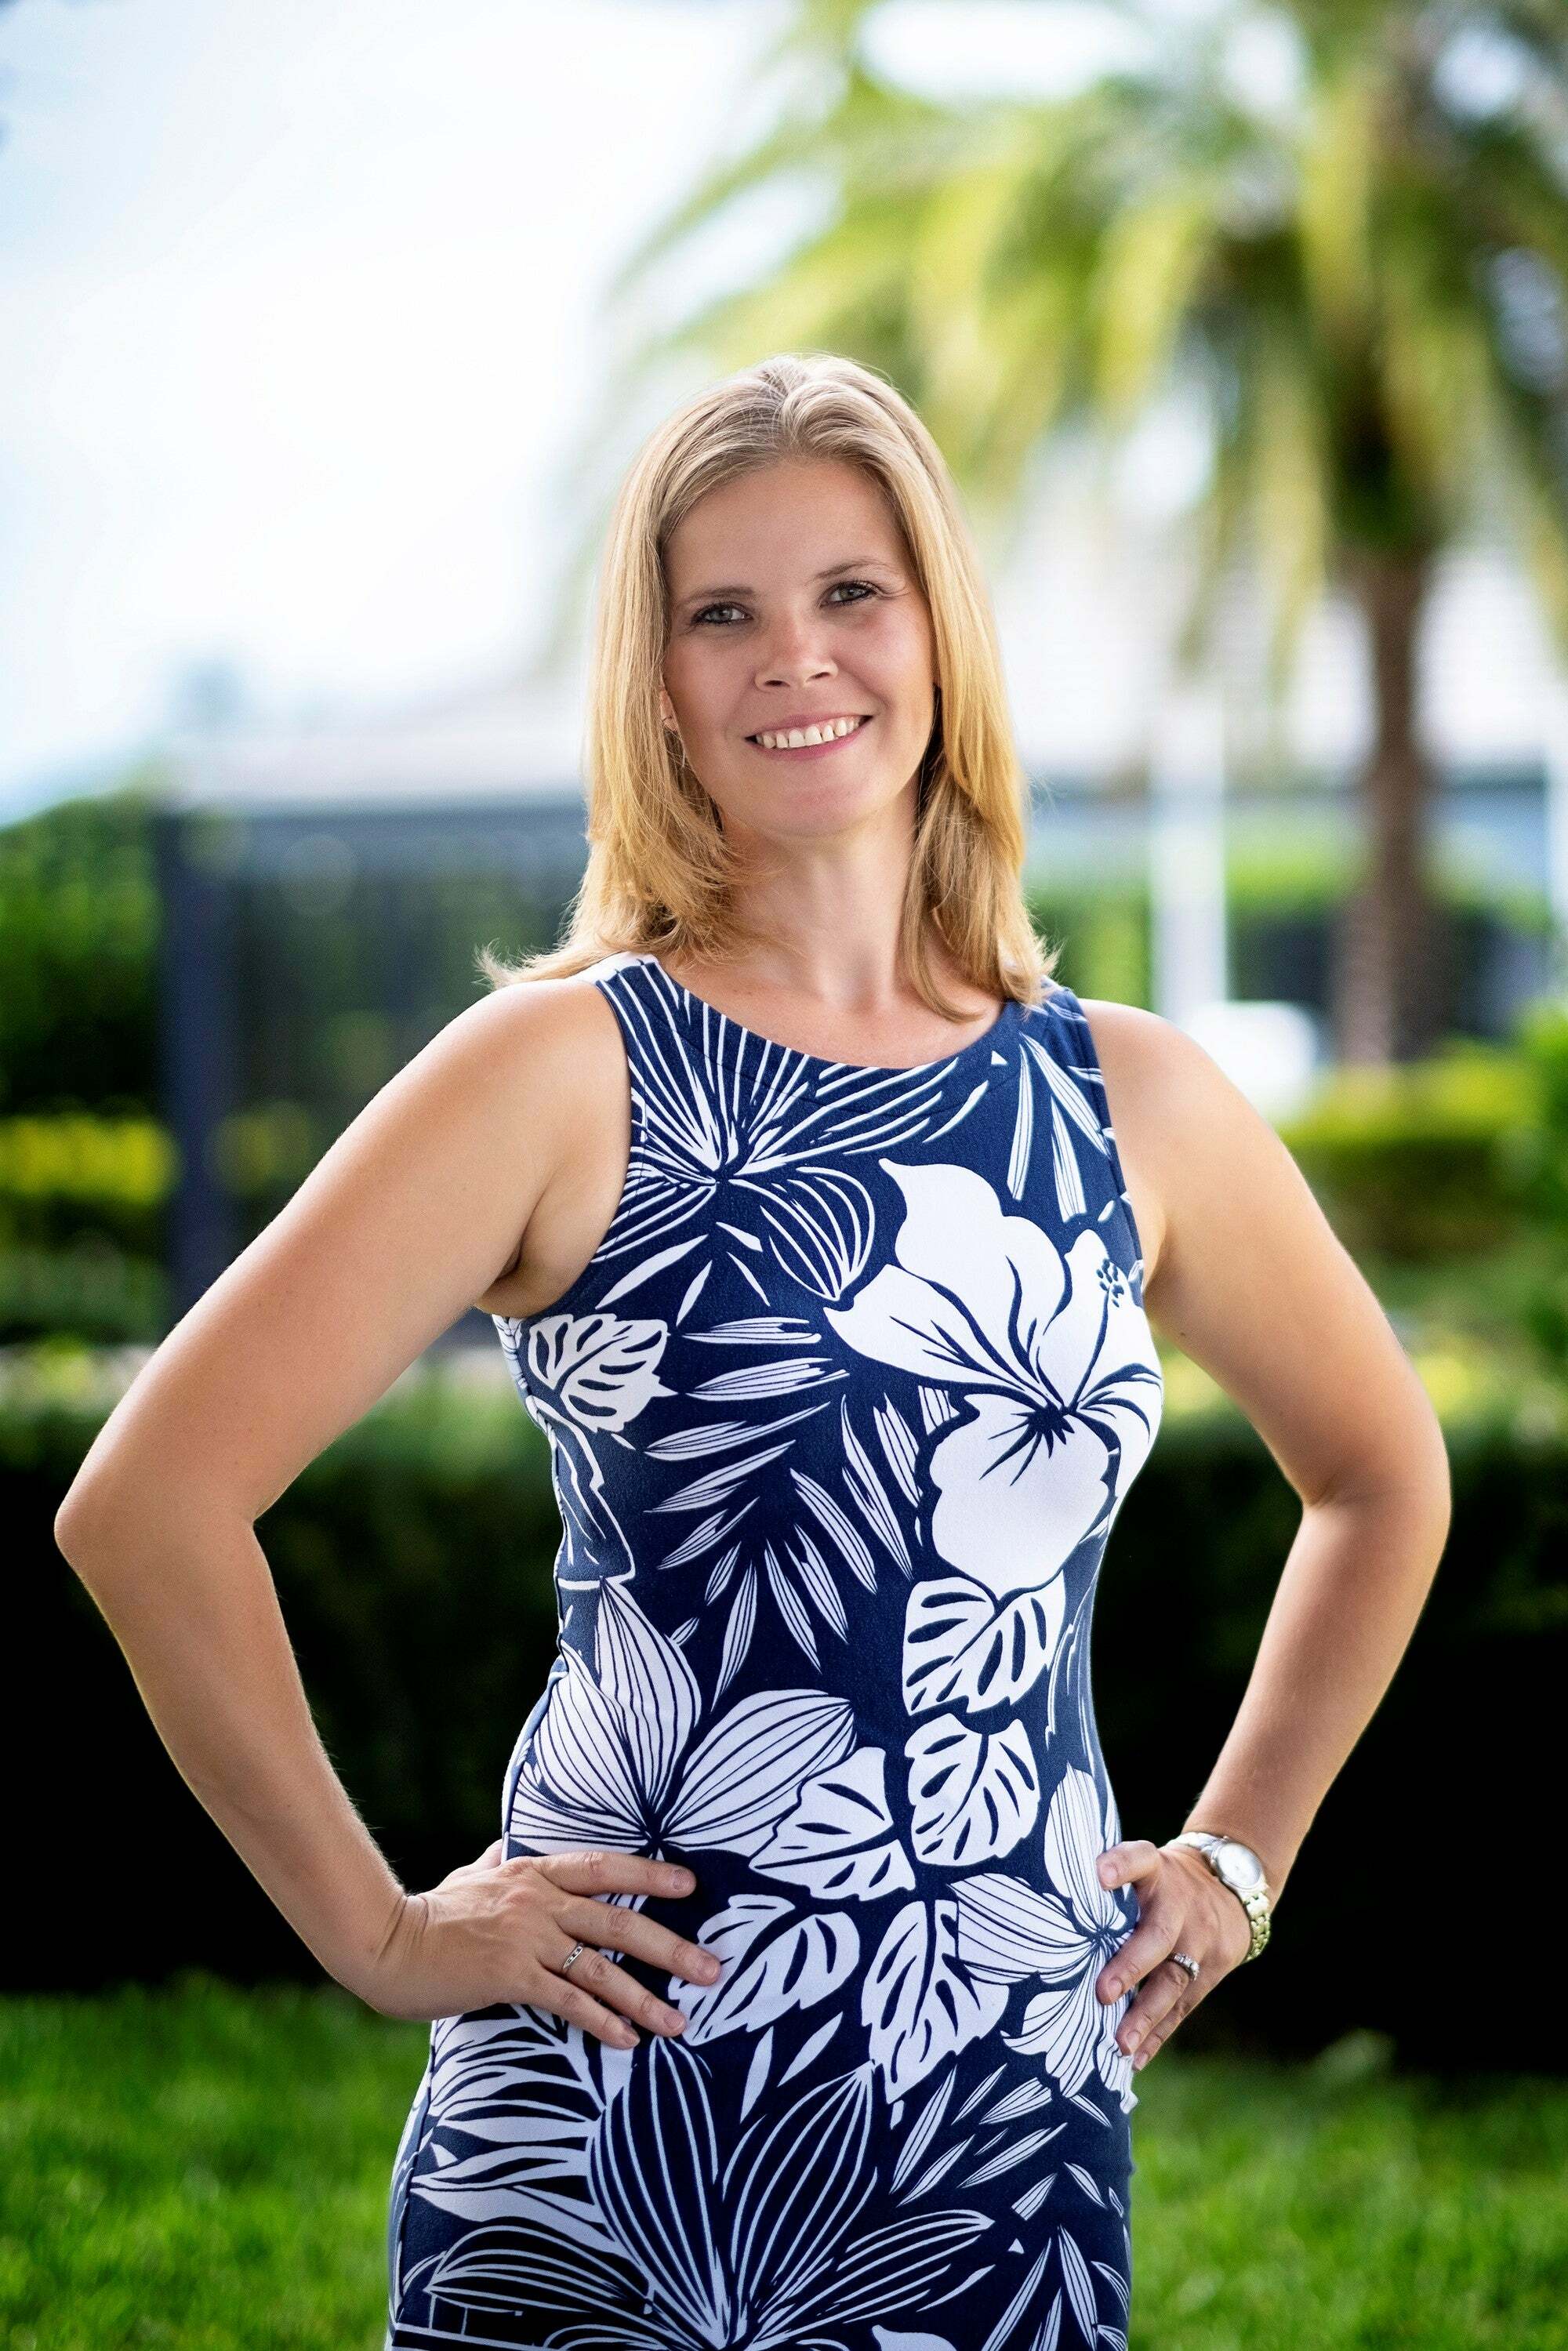 Samantha Campbell, Real Estate Salesperson in Lakewood Ranch, Atchley Properties